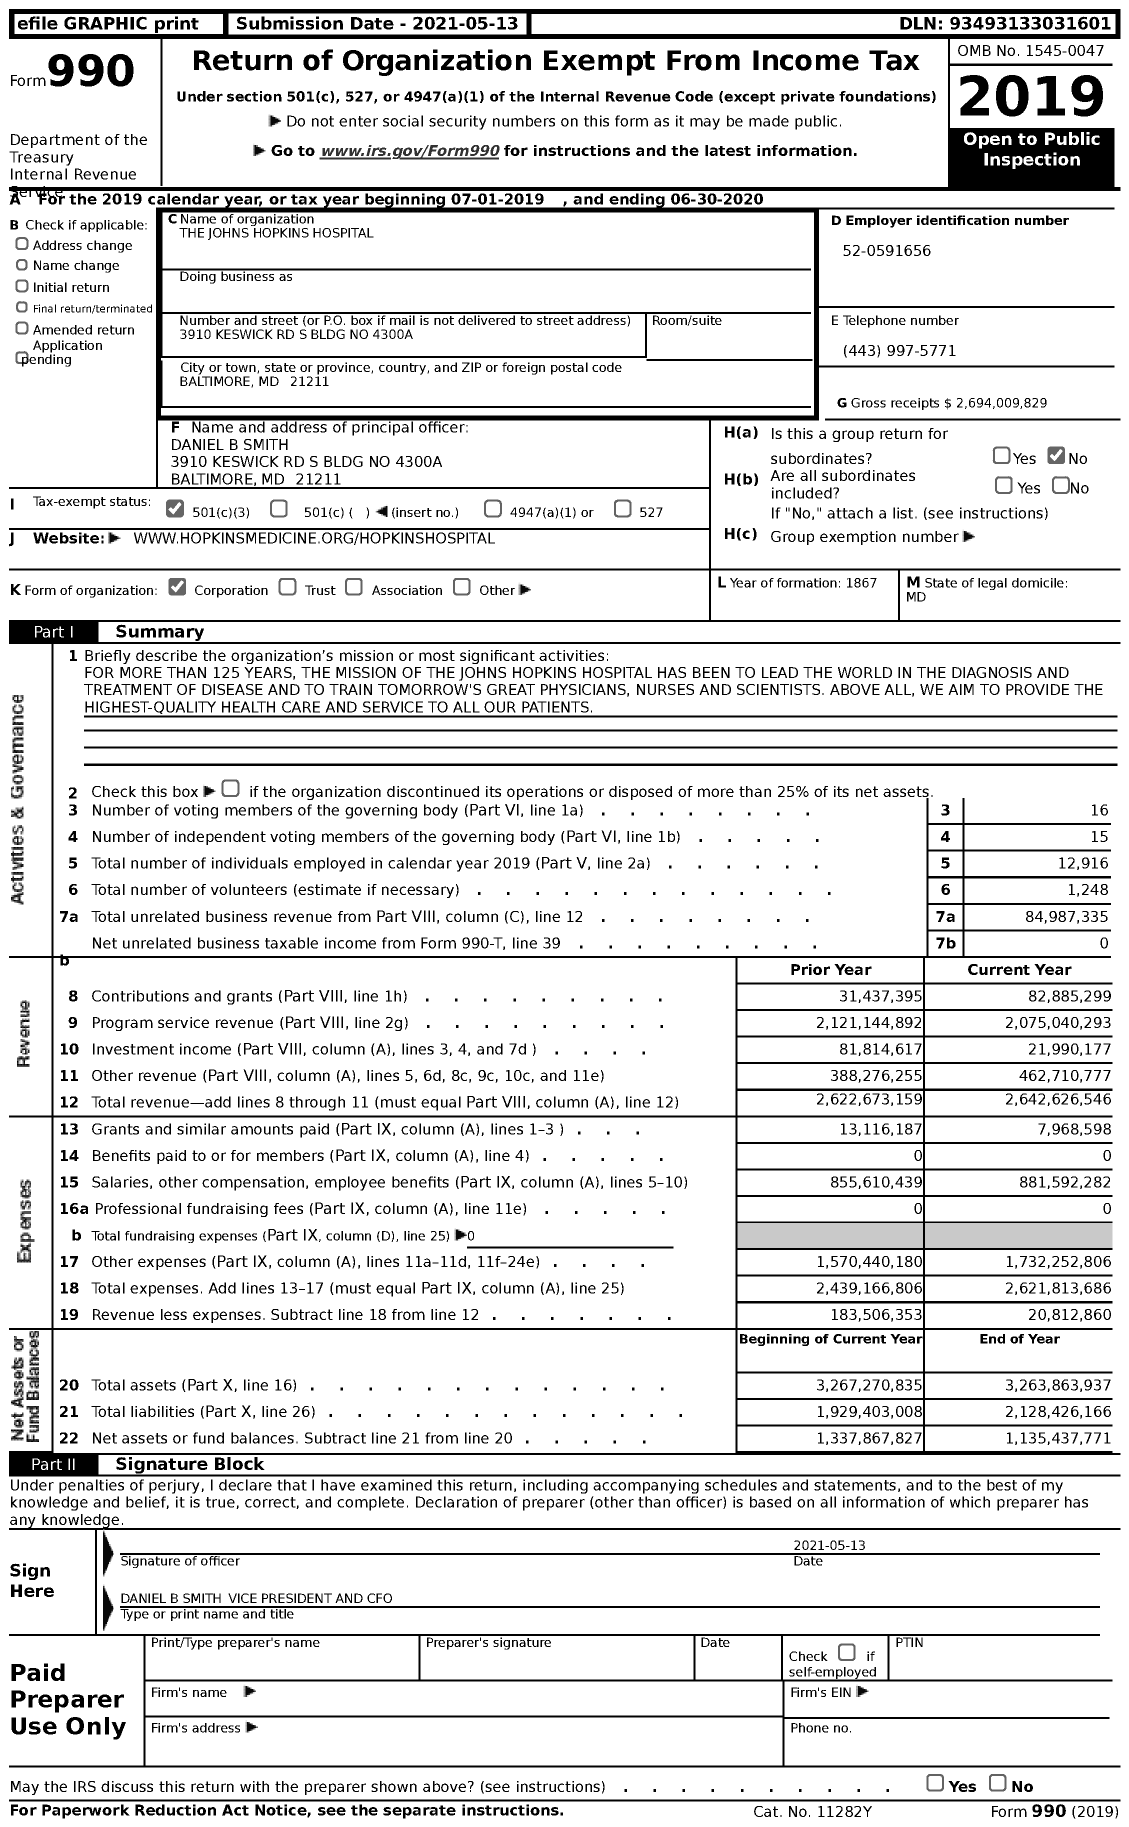 Image of first page of 2019 Form 990 for The Johns Hopkins Hospital (JHH)